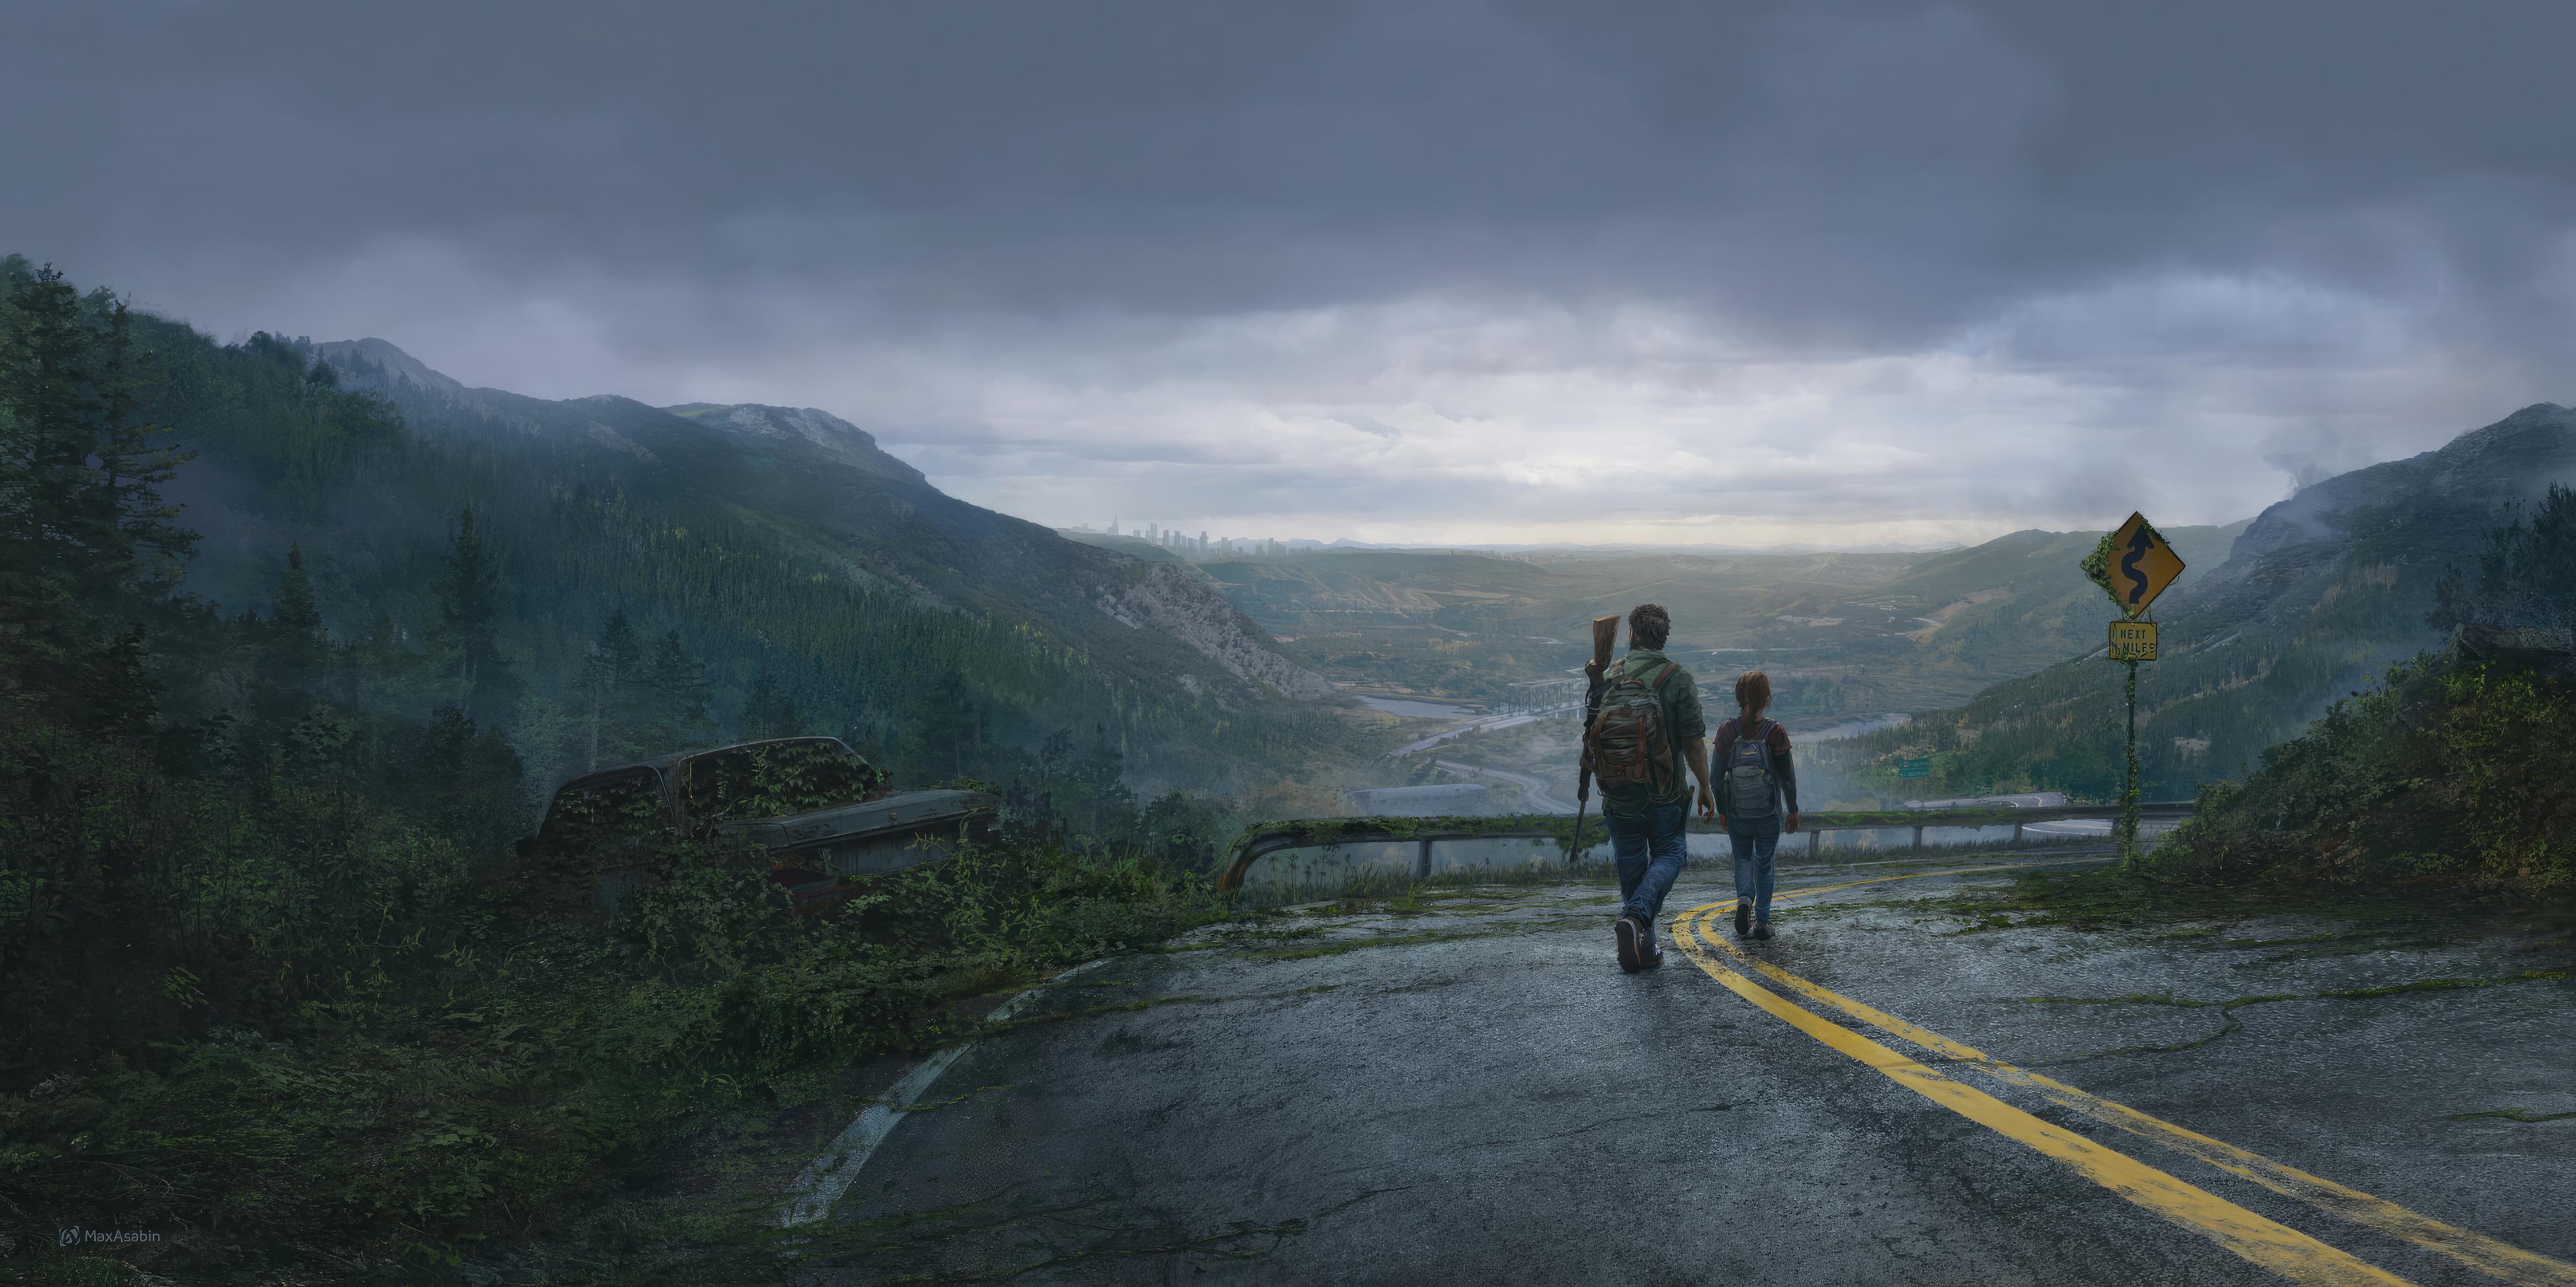 The Last Of Us HD Wallpaper And Background